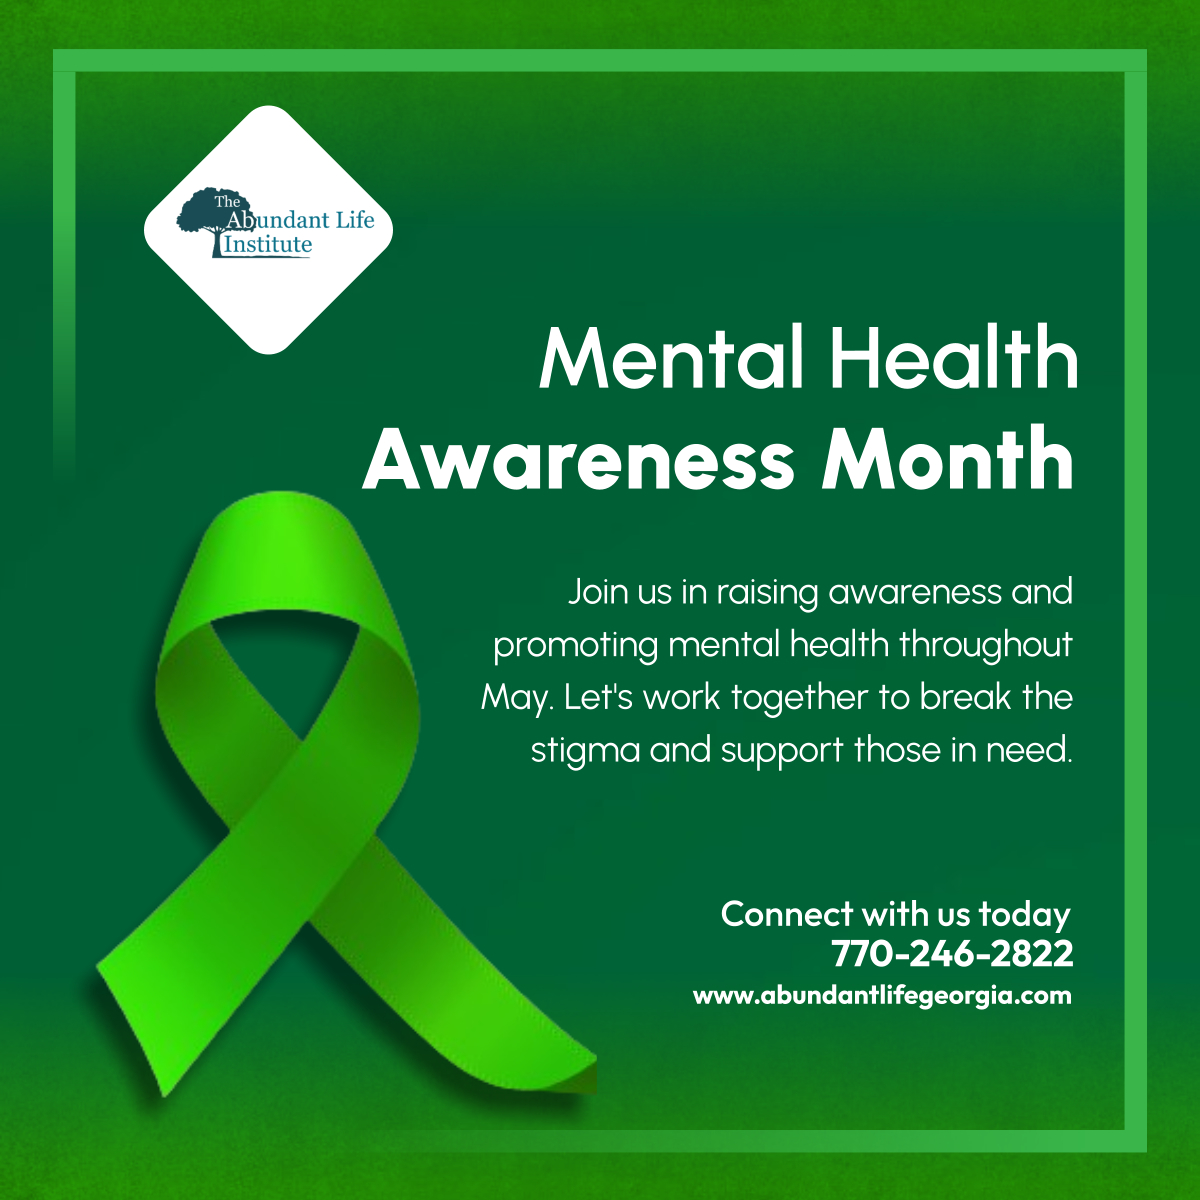 May is Mental Health Awareness Month. Let's come together to raise awareness, support each other, and break the stigma surrounding mental illness. 

#AthensGA #MentalHealthCare #MentalHealthAwarenessMonth #RaisingAwareness #JoinUs